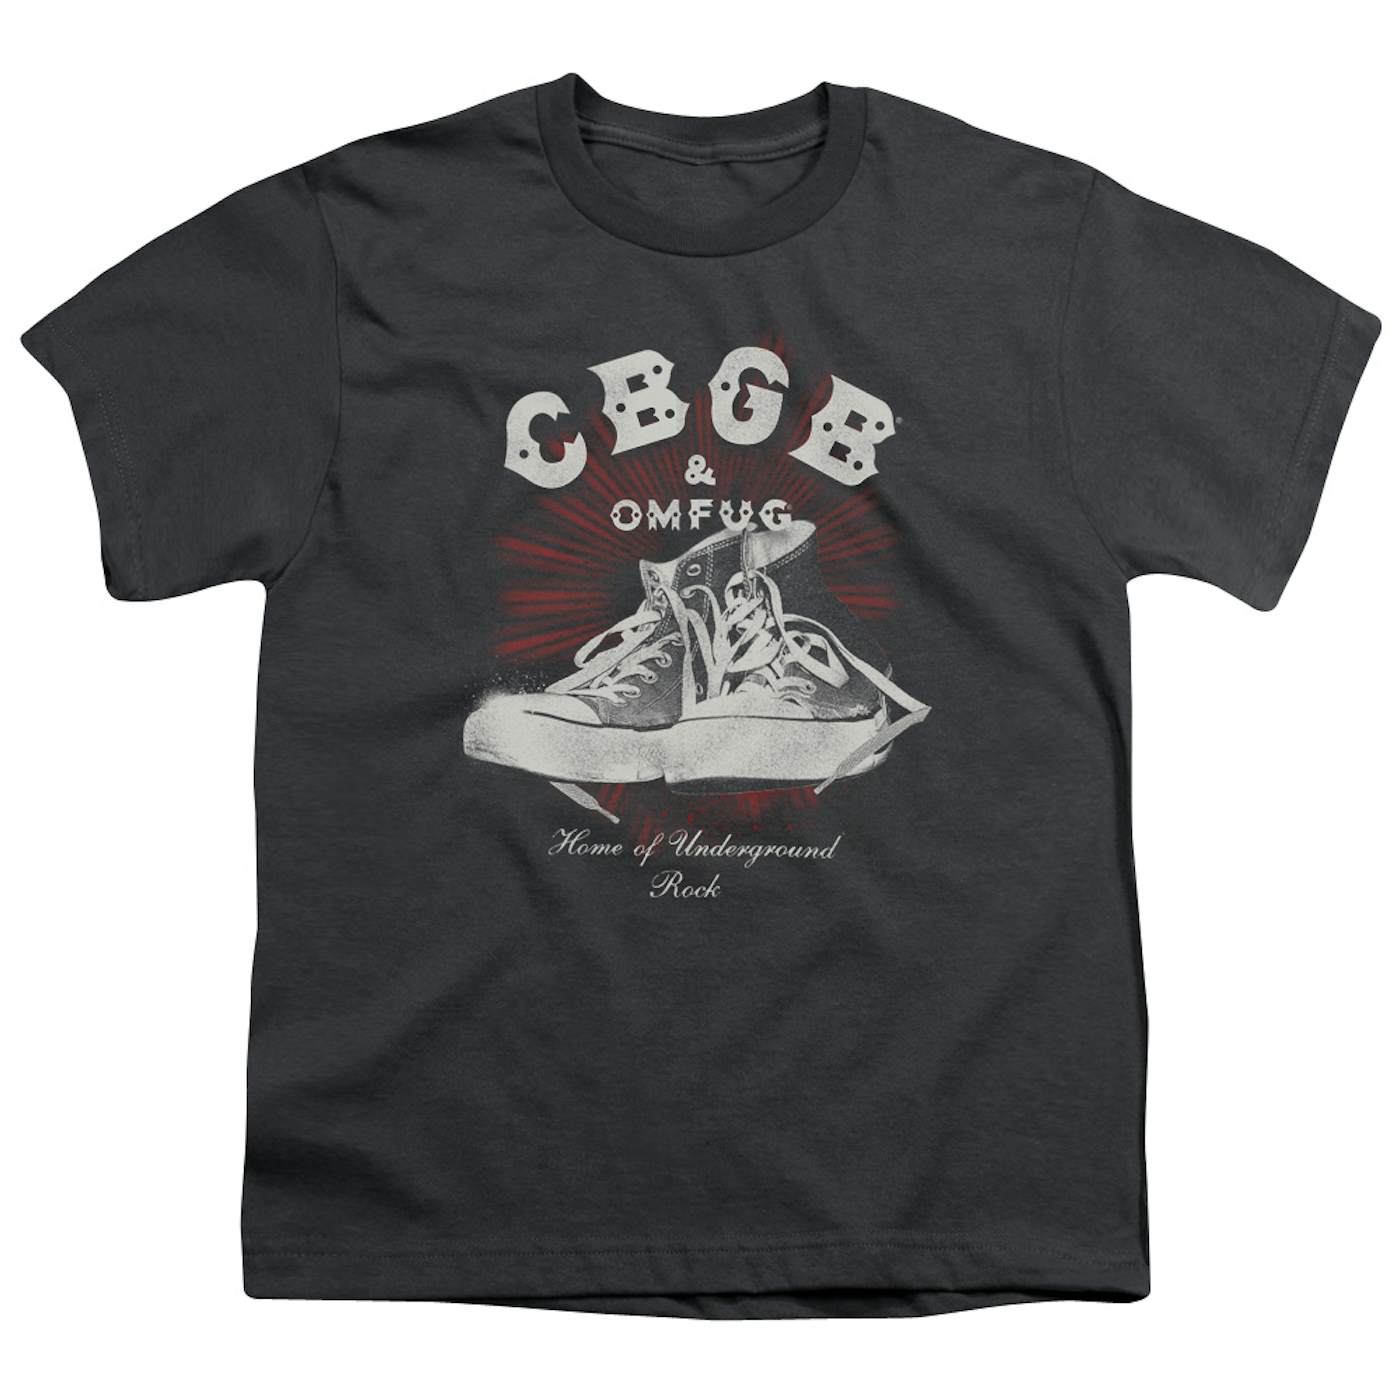 Cbgb Youth Tee | HIGH TOPS Youth T Shirt